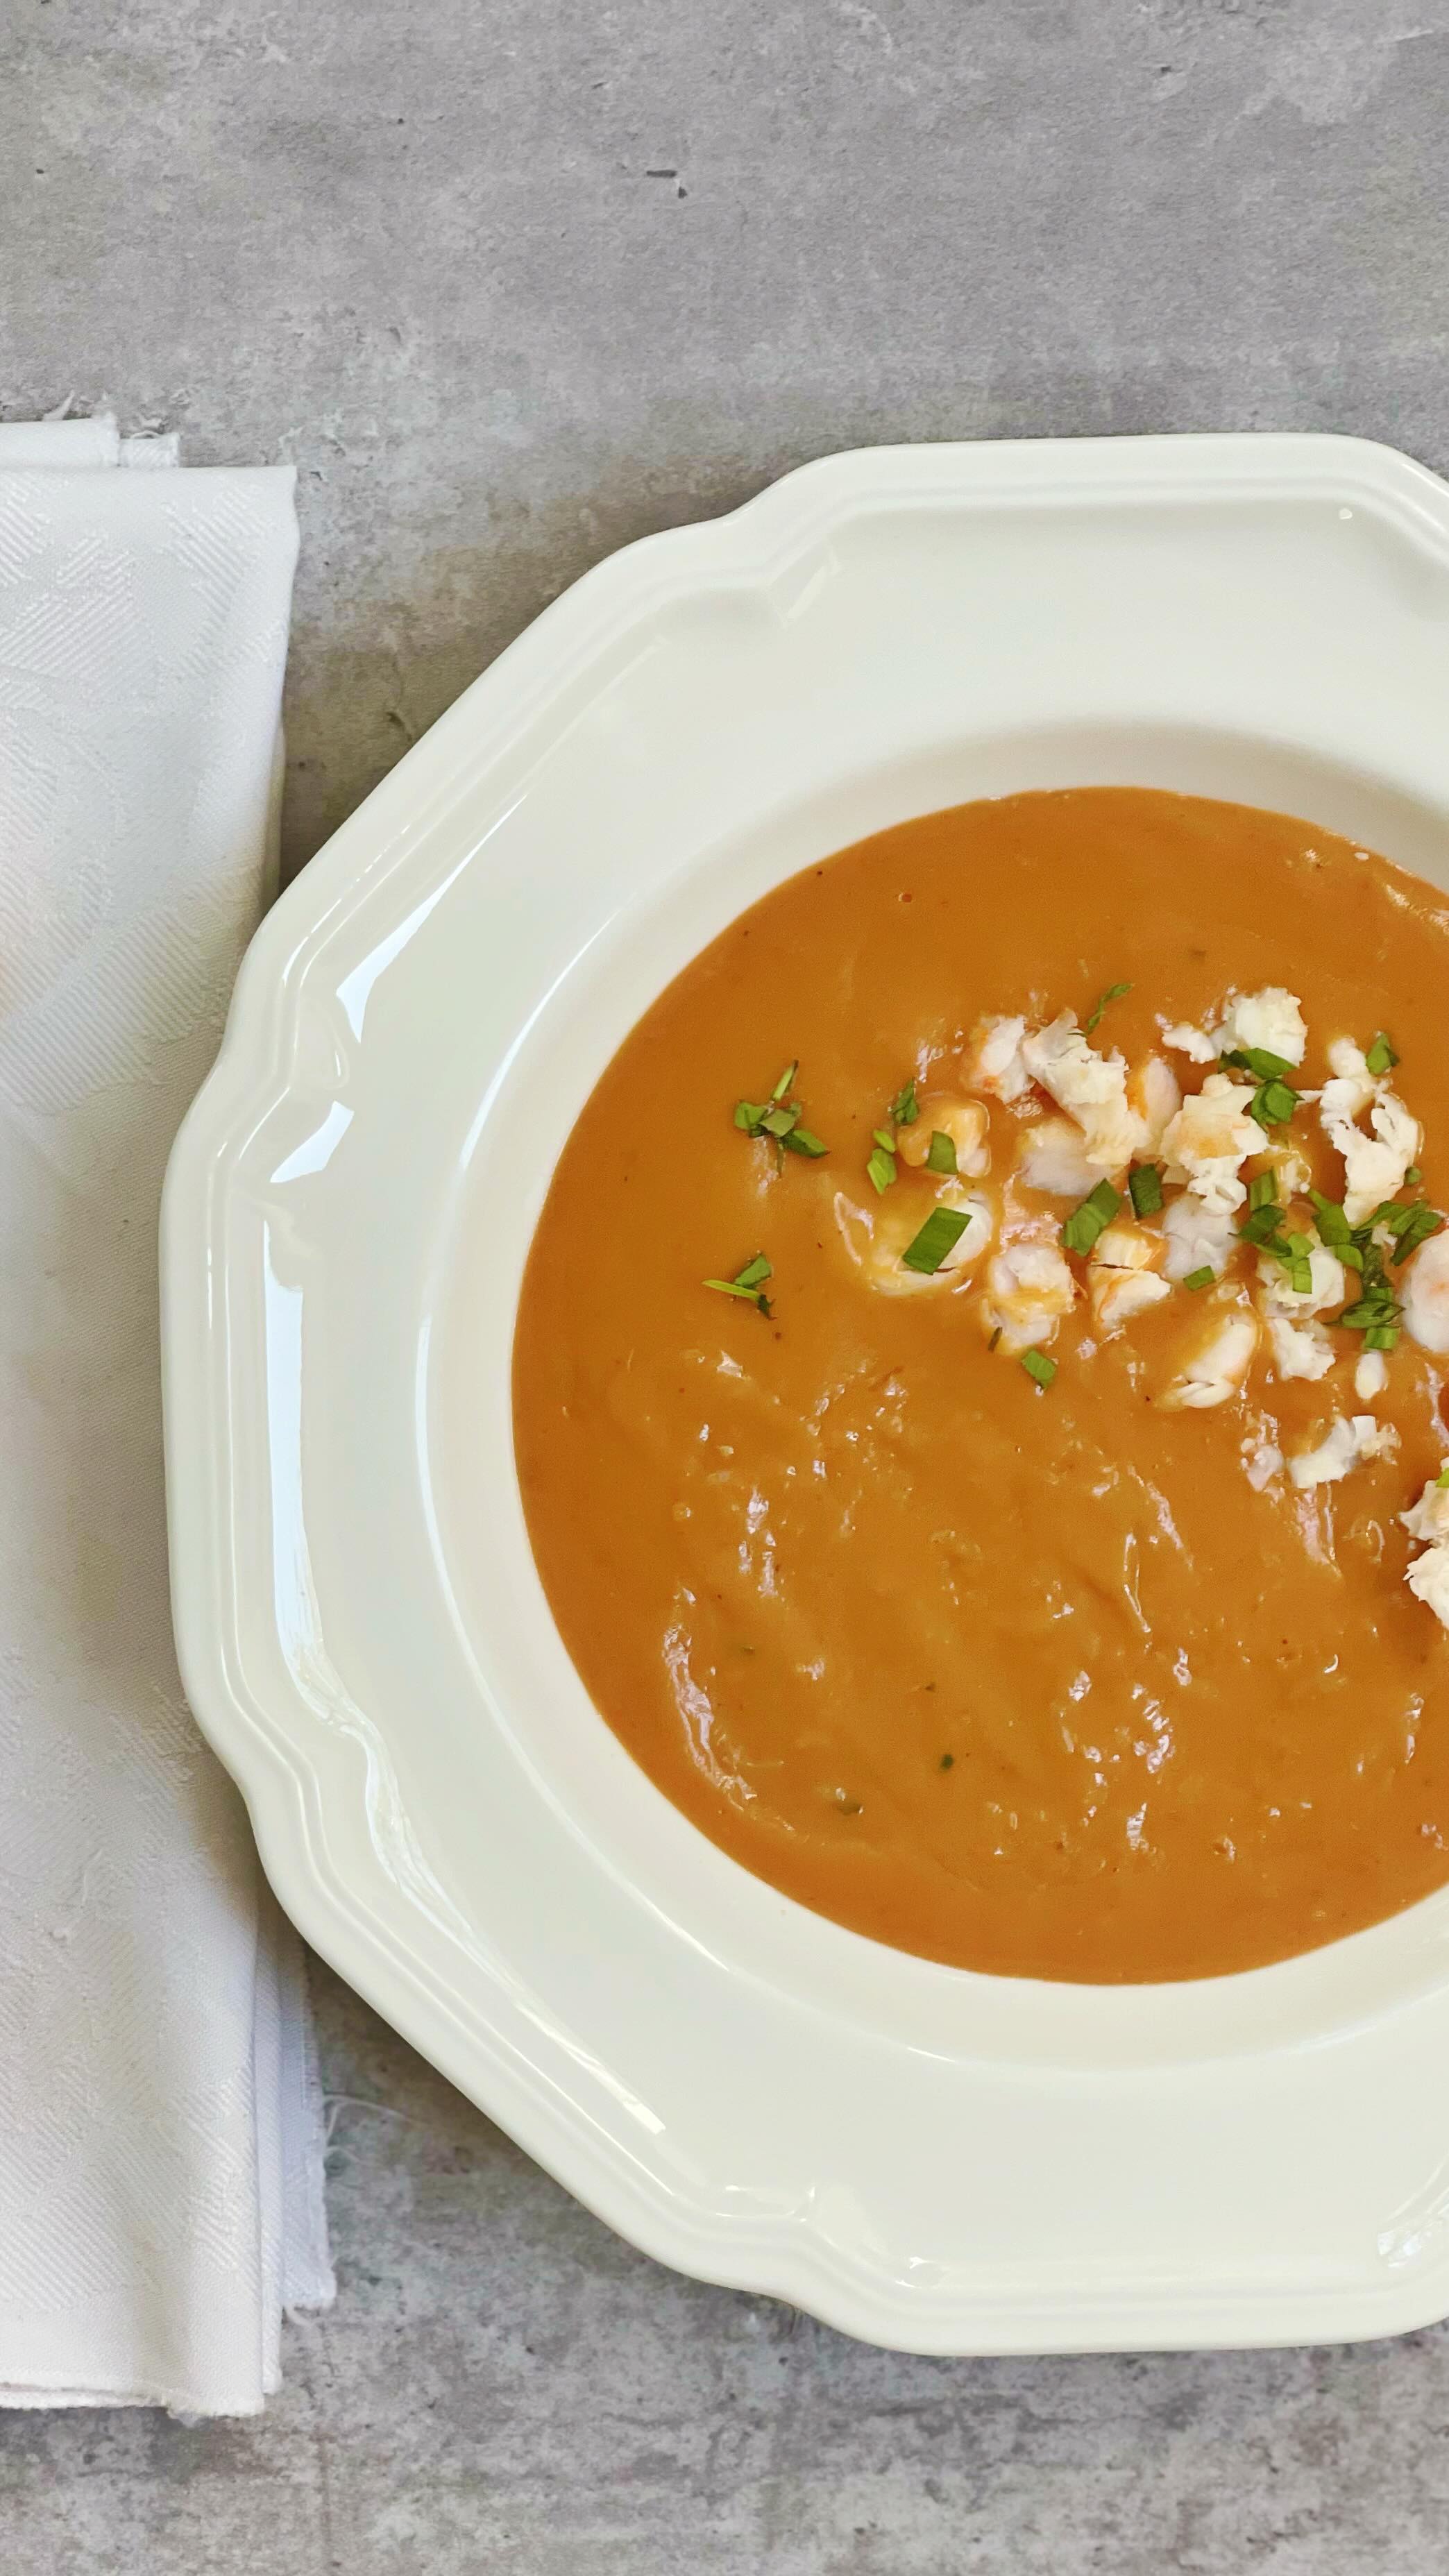 Creamy Lobster Bisque is now up on the @dinnerreinvented home page. It’s a weekend recipe or something to make when you have a little extra time to spend in the kitchen. But I promise it’s worth the time! Cold weather days are perfect for cuddling up with a bowl of this comforting and decadent soup #lobster #lobsterbisque #soup #souprecipe #creamysoup #comfortfood #viralrecipes #foodtiktok #recipereels #foodblogger #momblogger #recipedeveloper #dinnerideas #dinnerrecipes #roniproter #dinnerreinvented